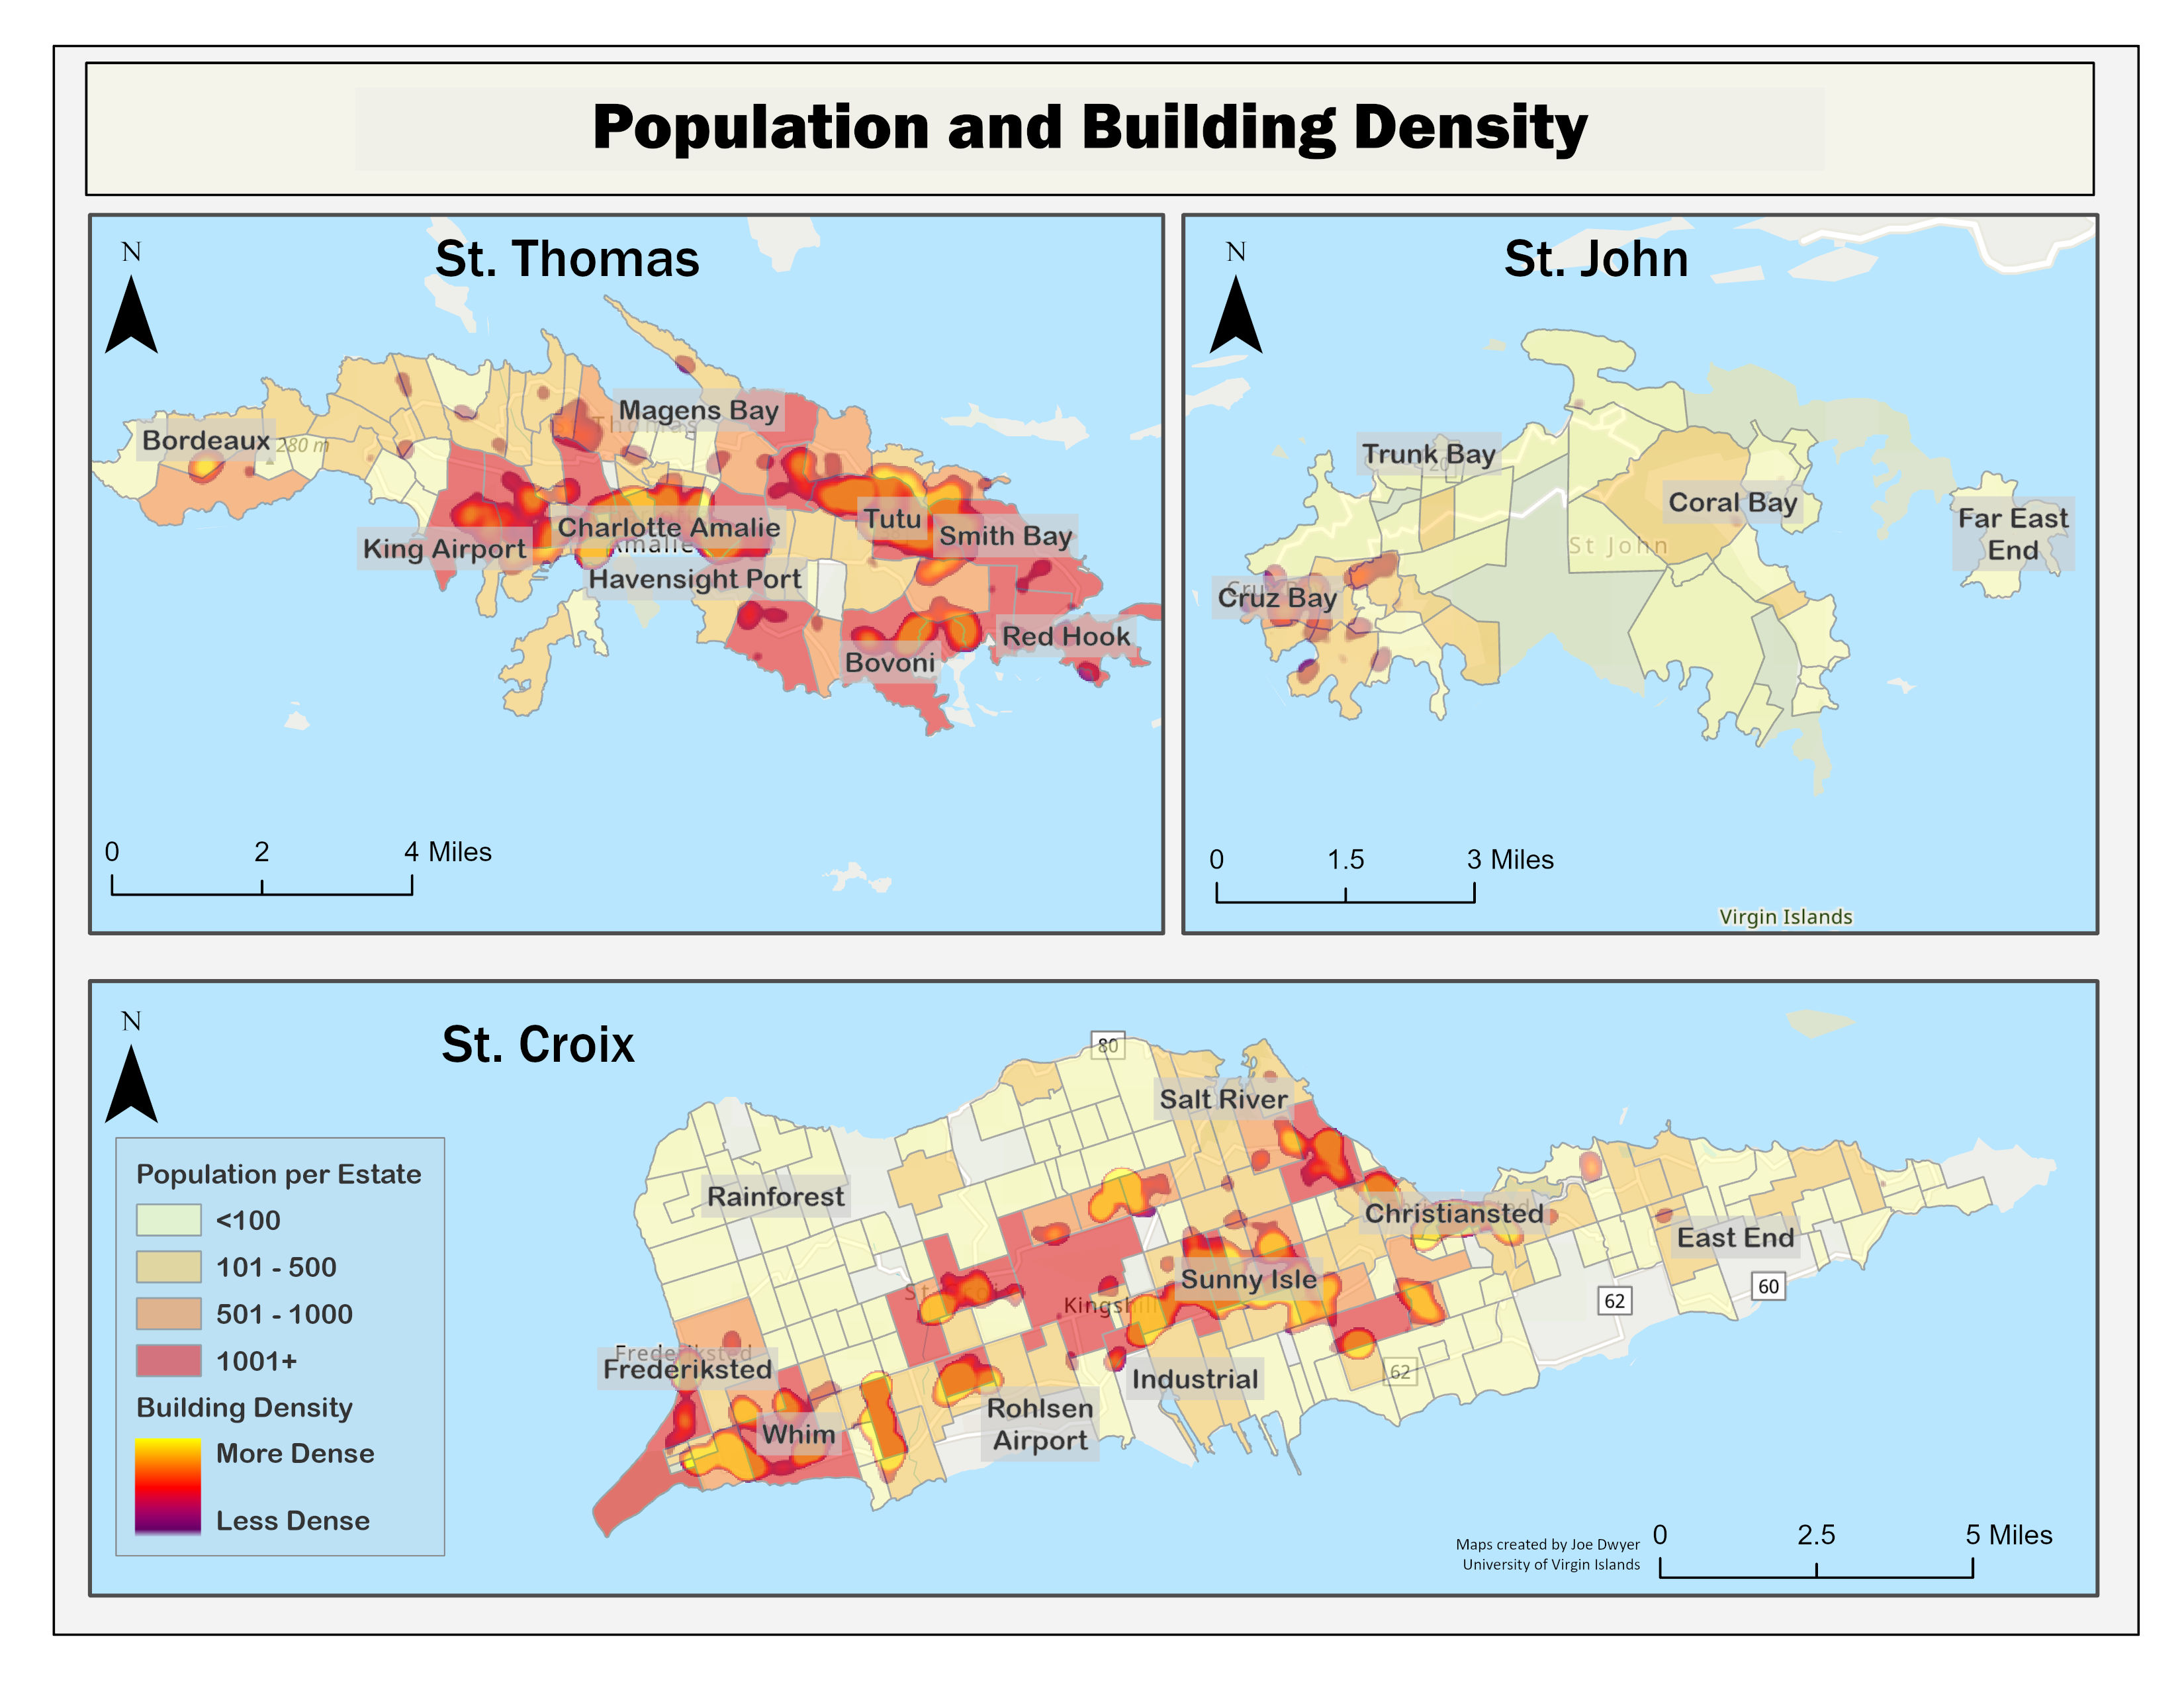 Population and Building Density